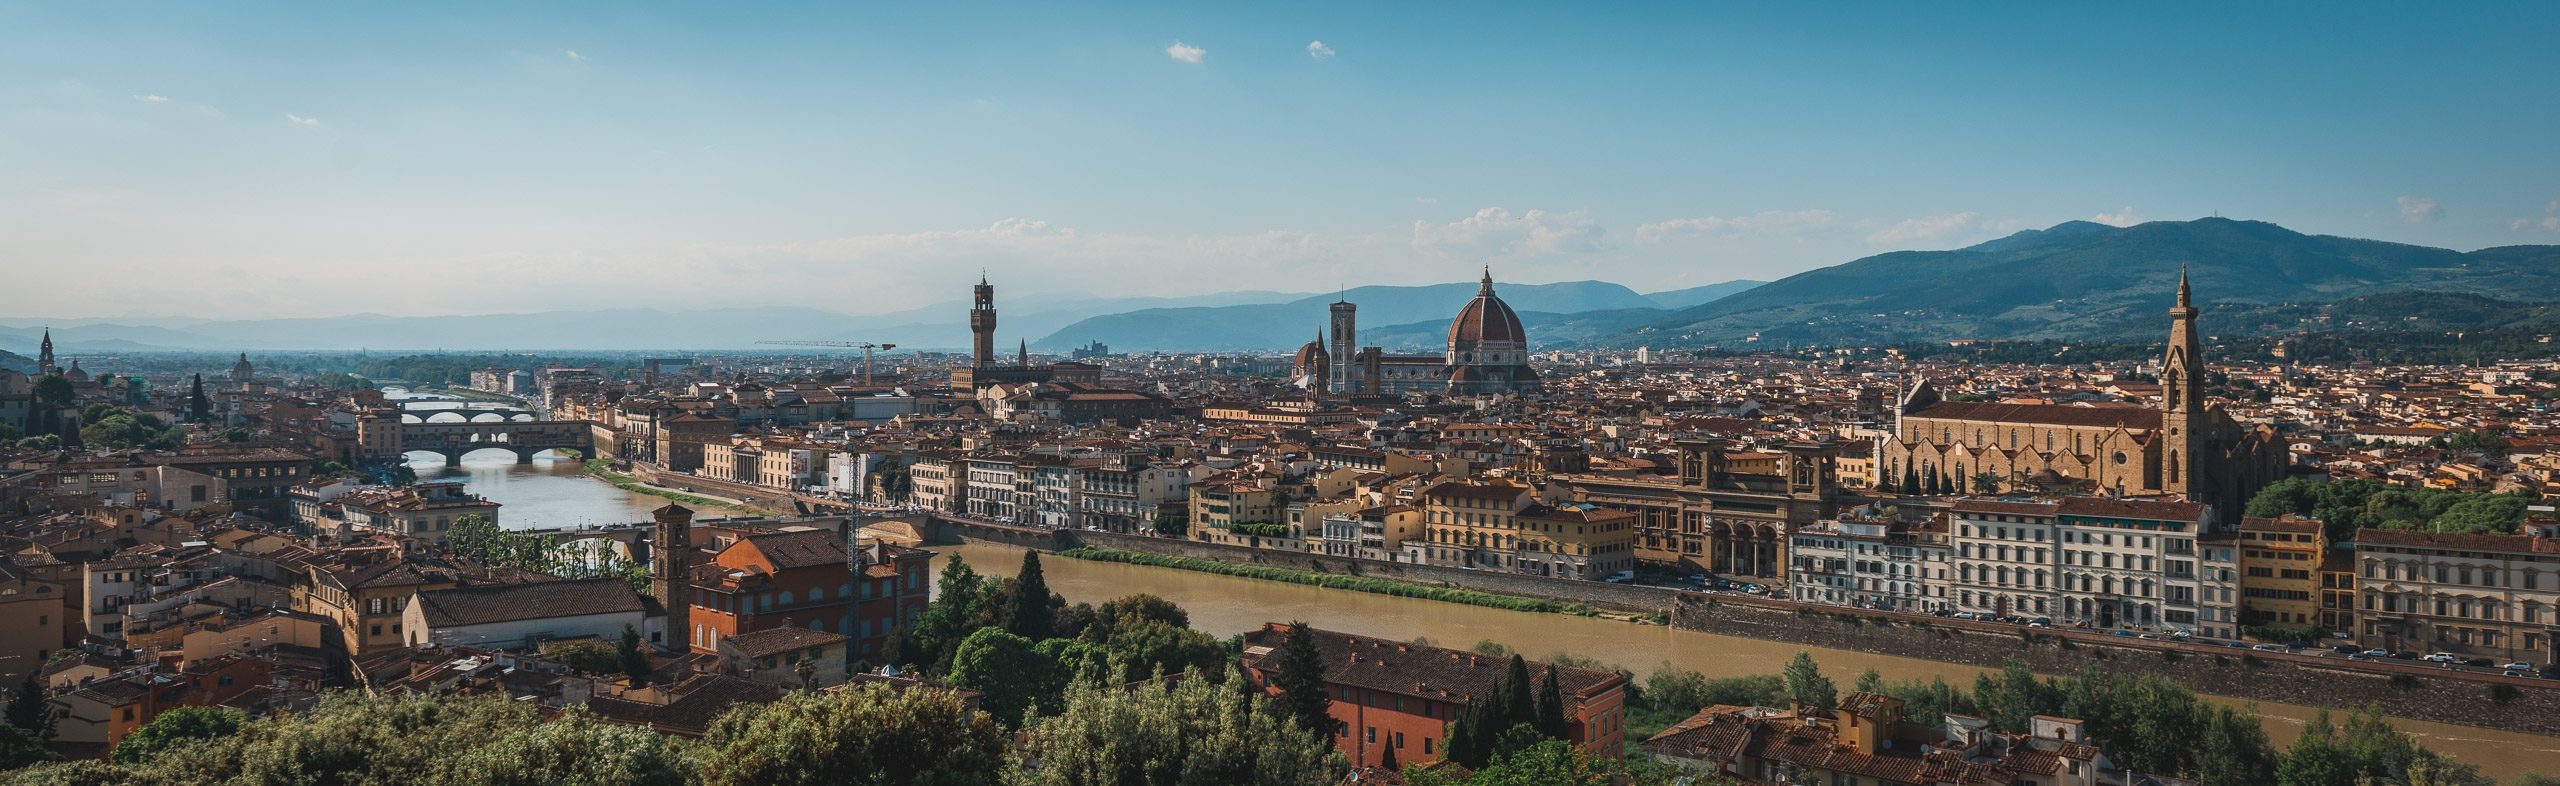 Overlooking All of Florence 2